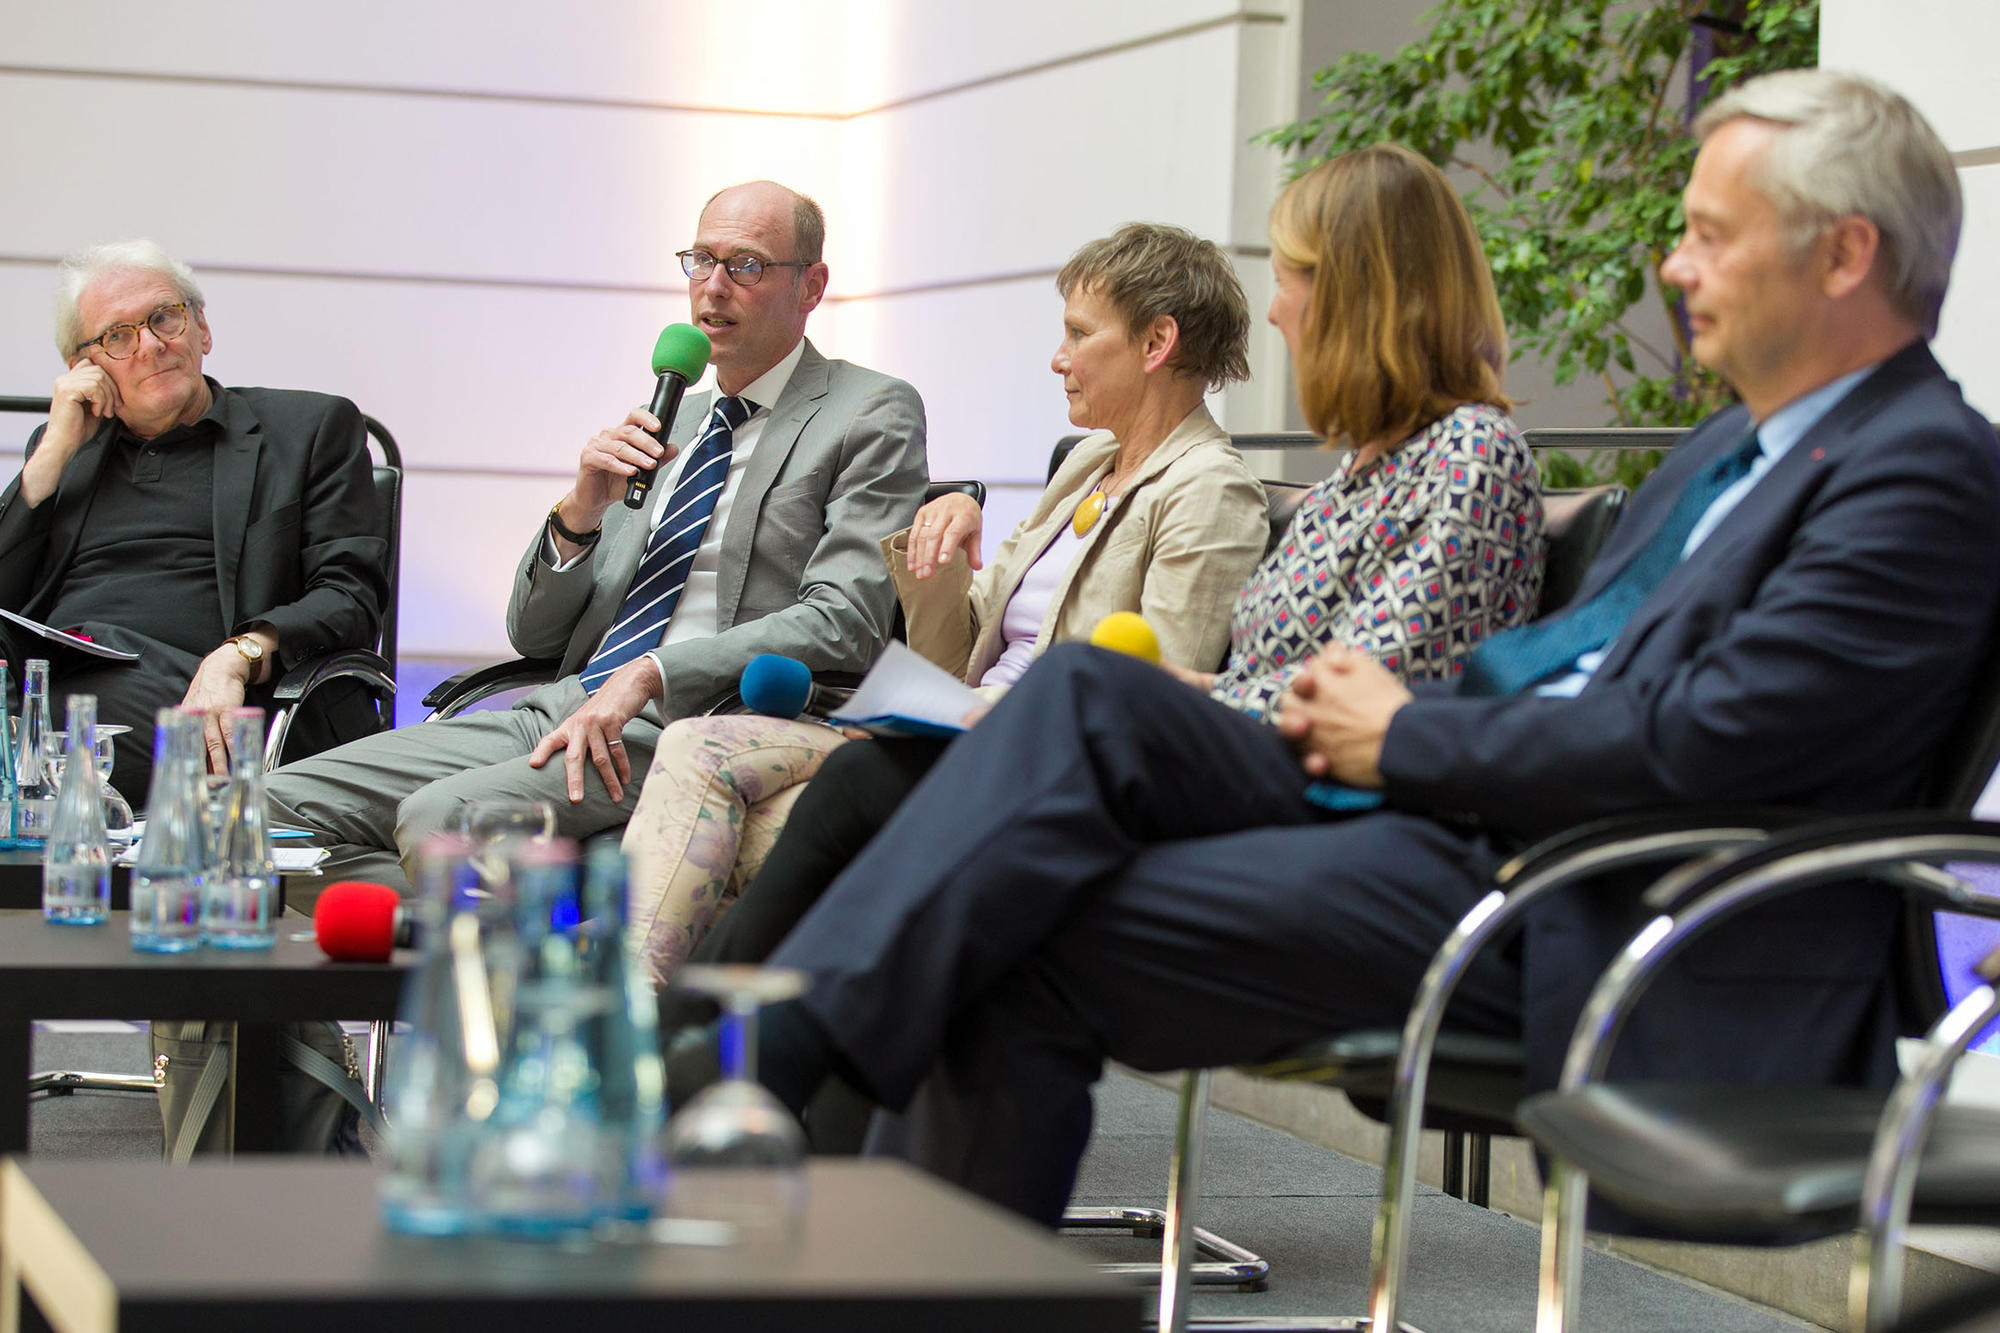 …where universities’ presidents and the Chief Executive Officer of Charité were on the panel, with Susanne Führer of Deutschlandfunk Kultur taking on the role of moderator.